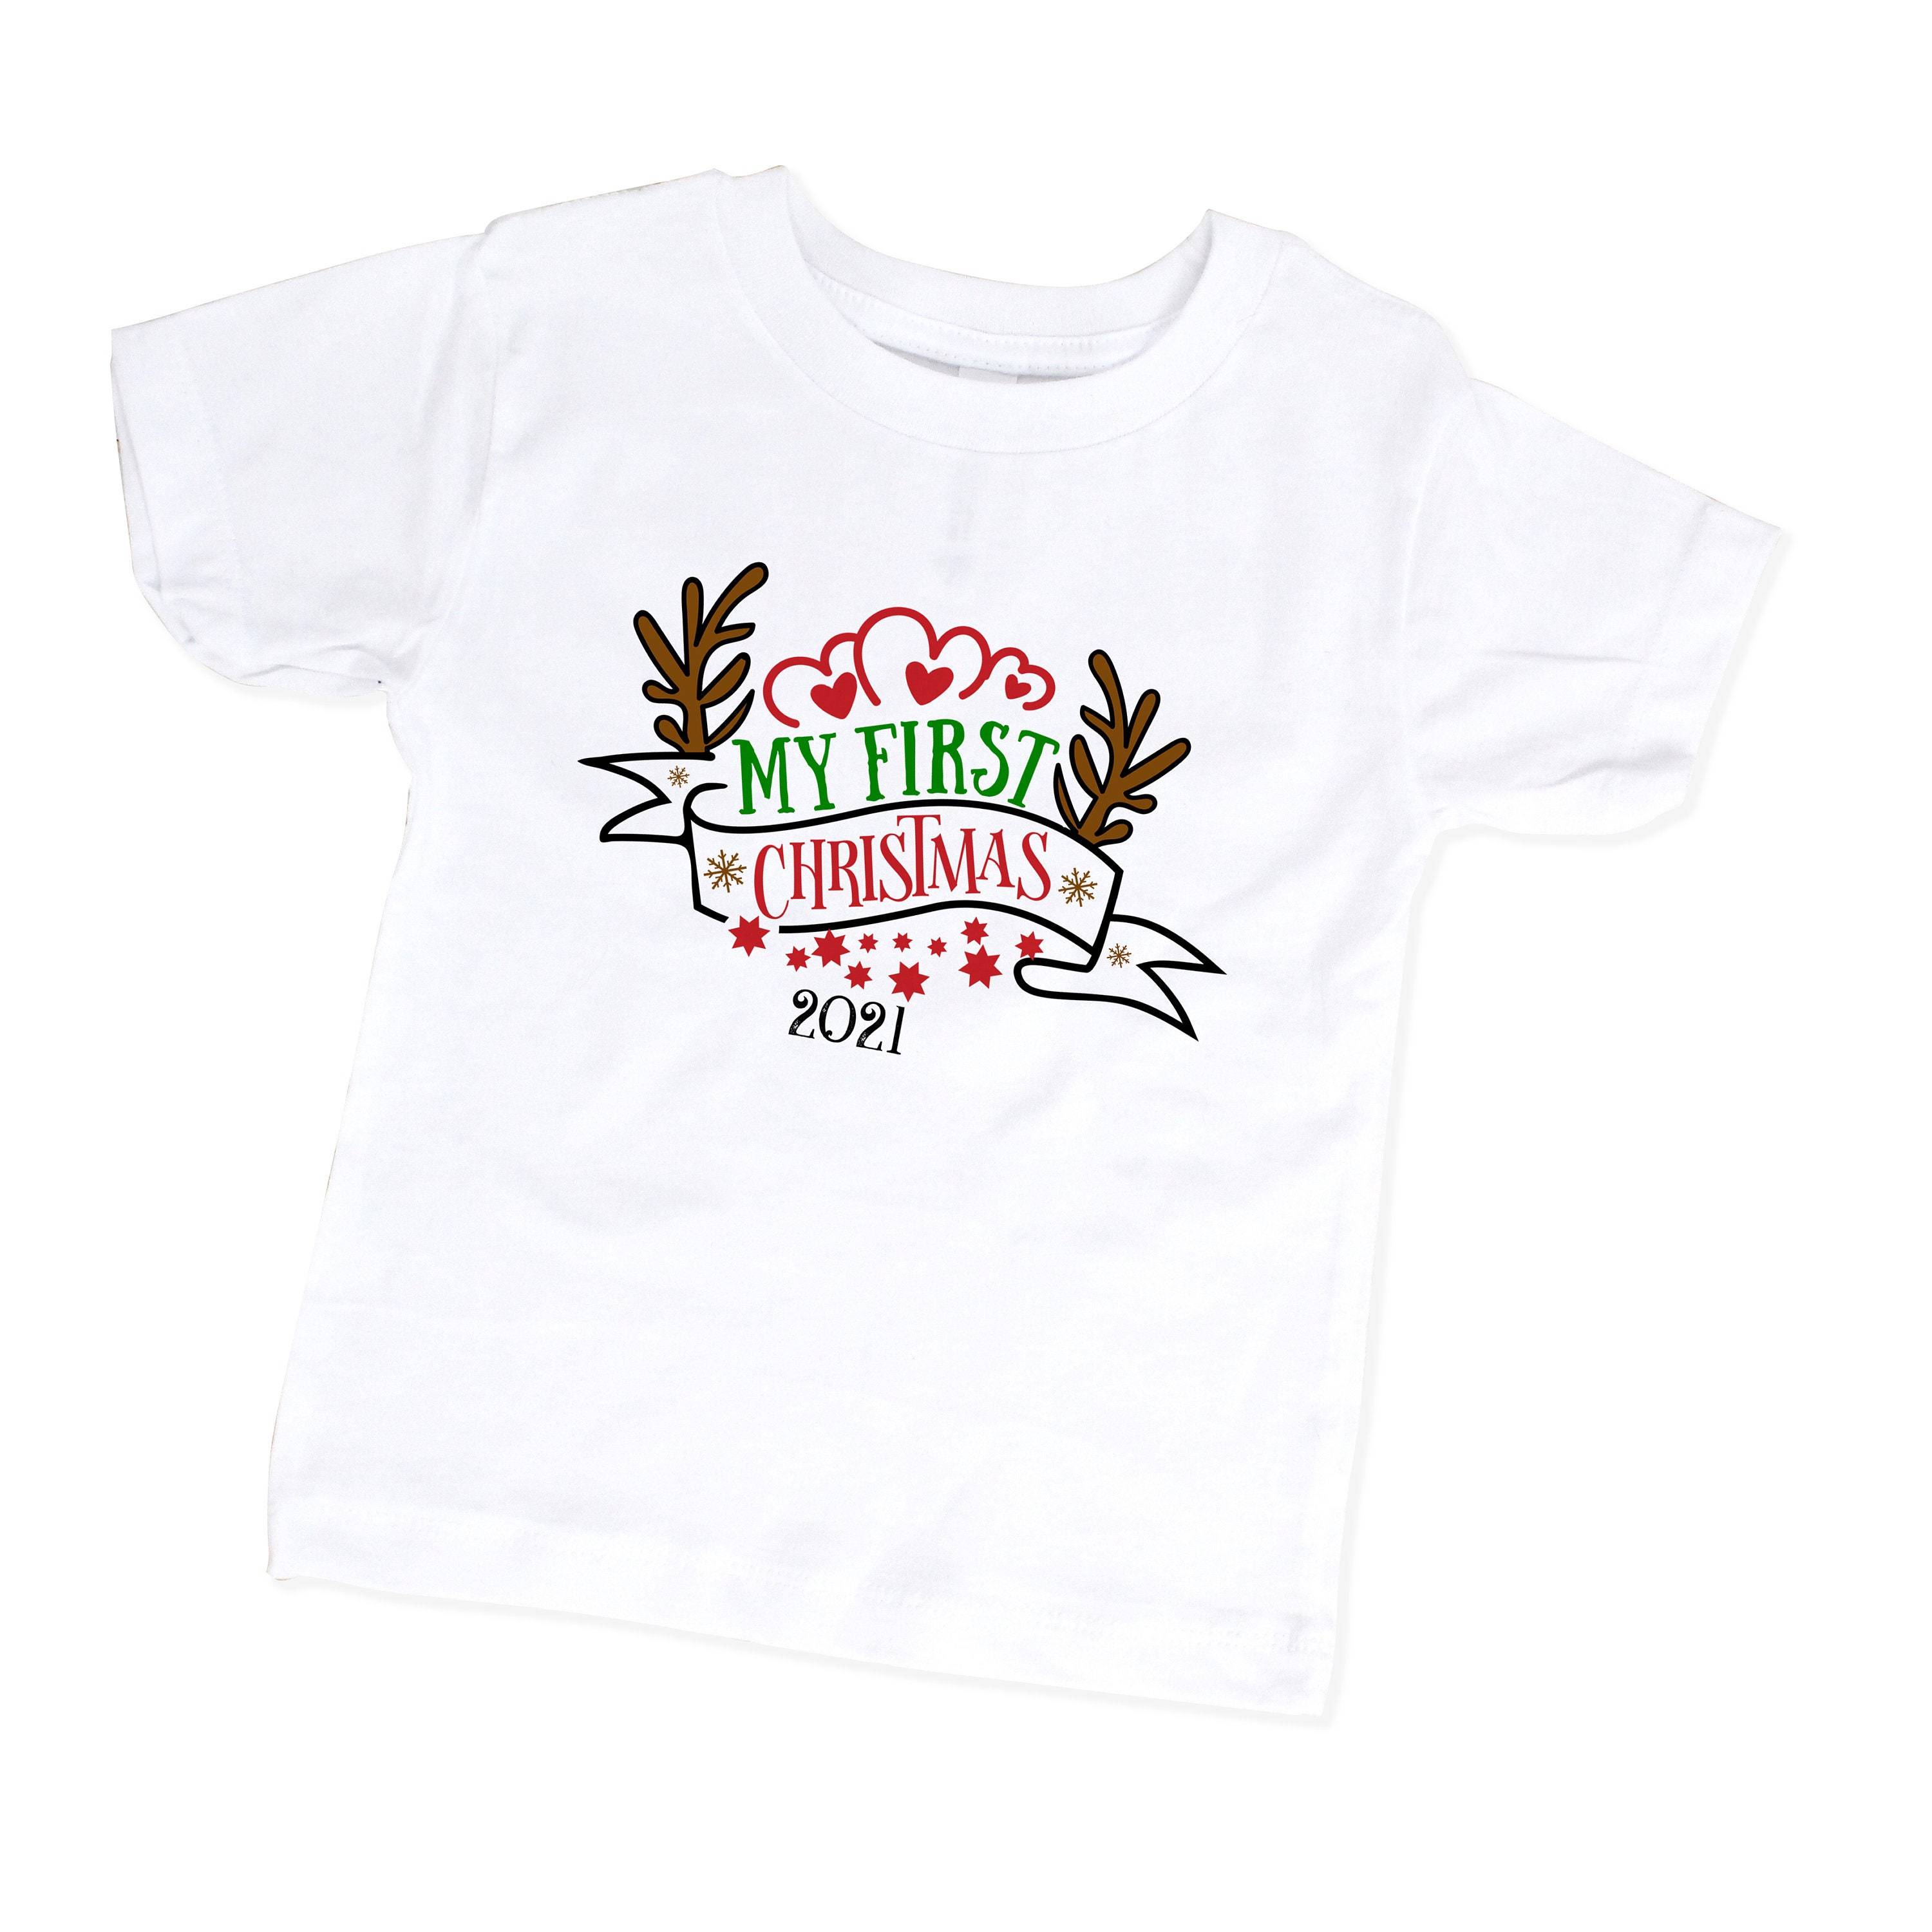 My First Christmas t-shirt, Baby 1st Xmas Boy Girl Top, Gift For Kids